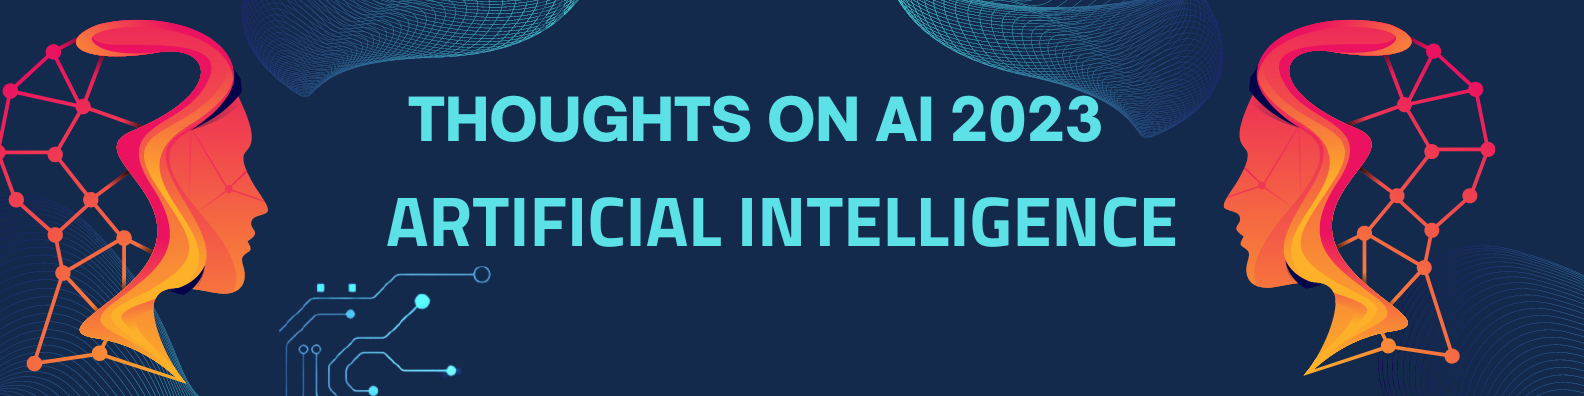 thoughts on ai 2023 artificial intelligence